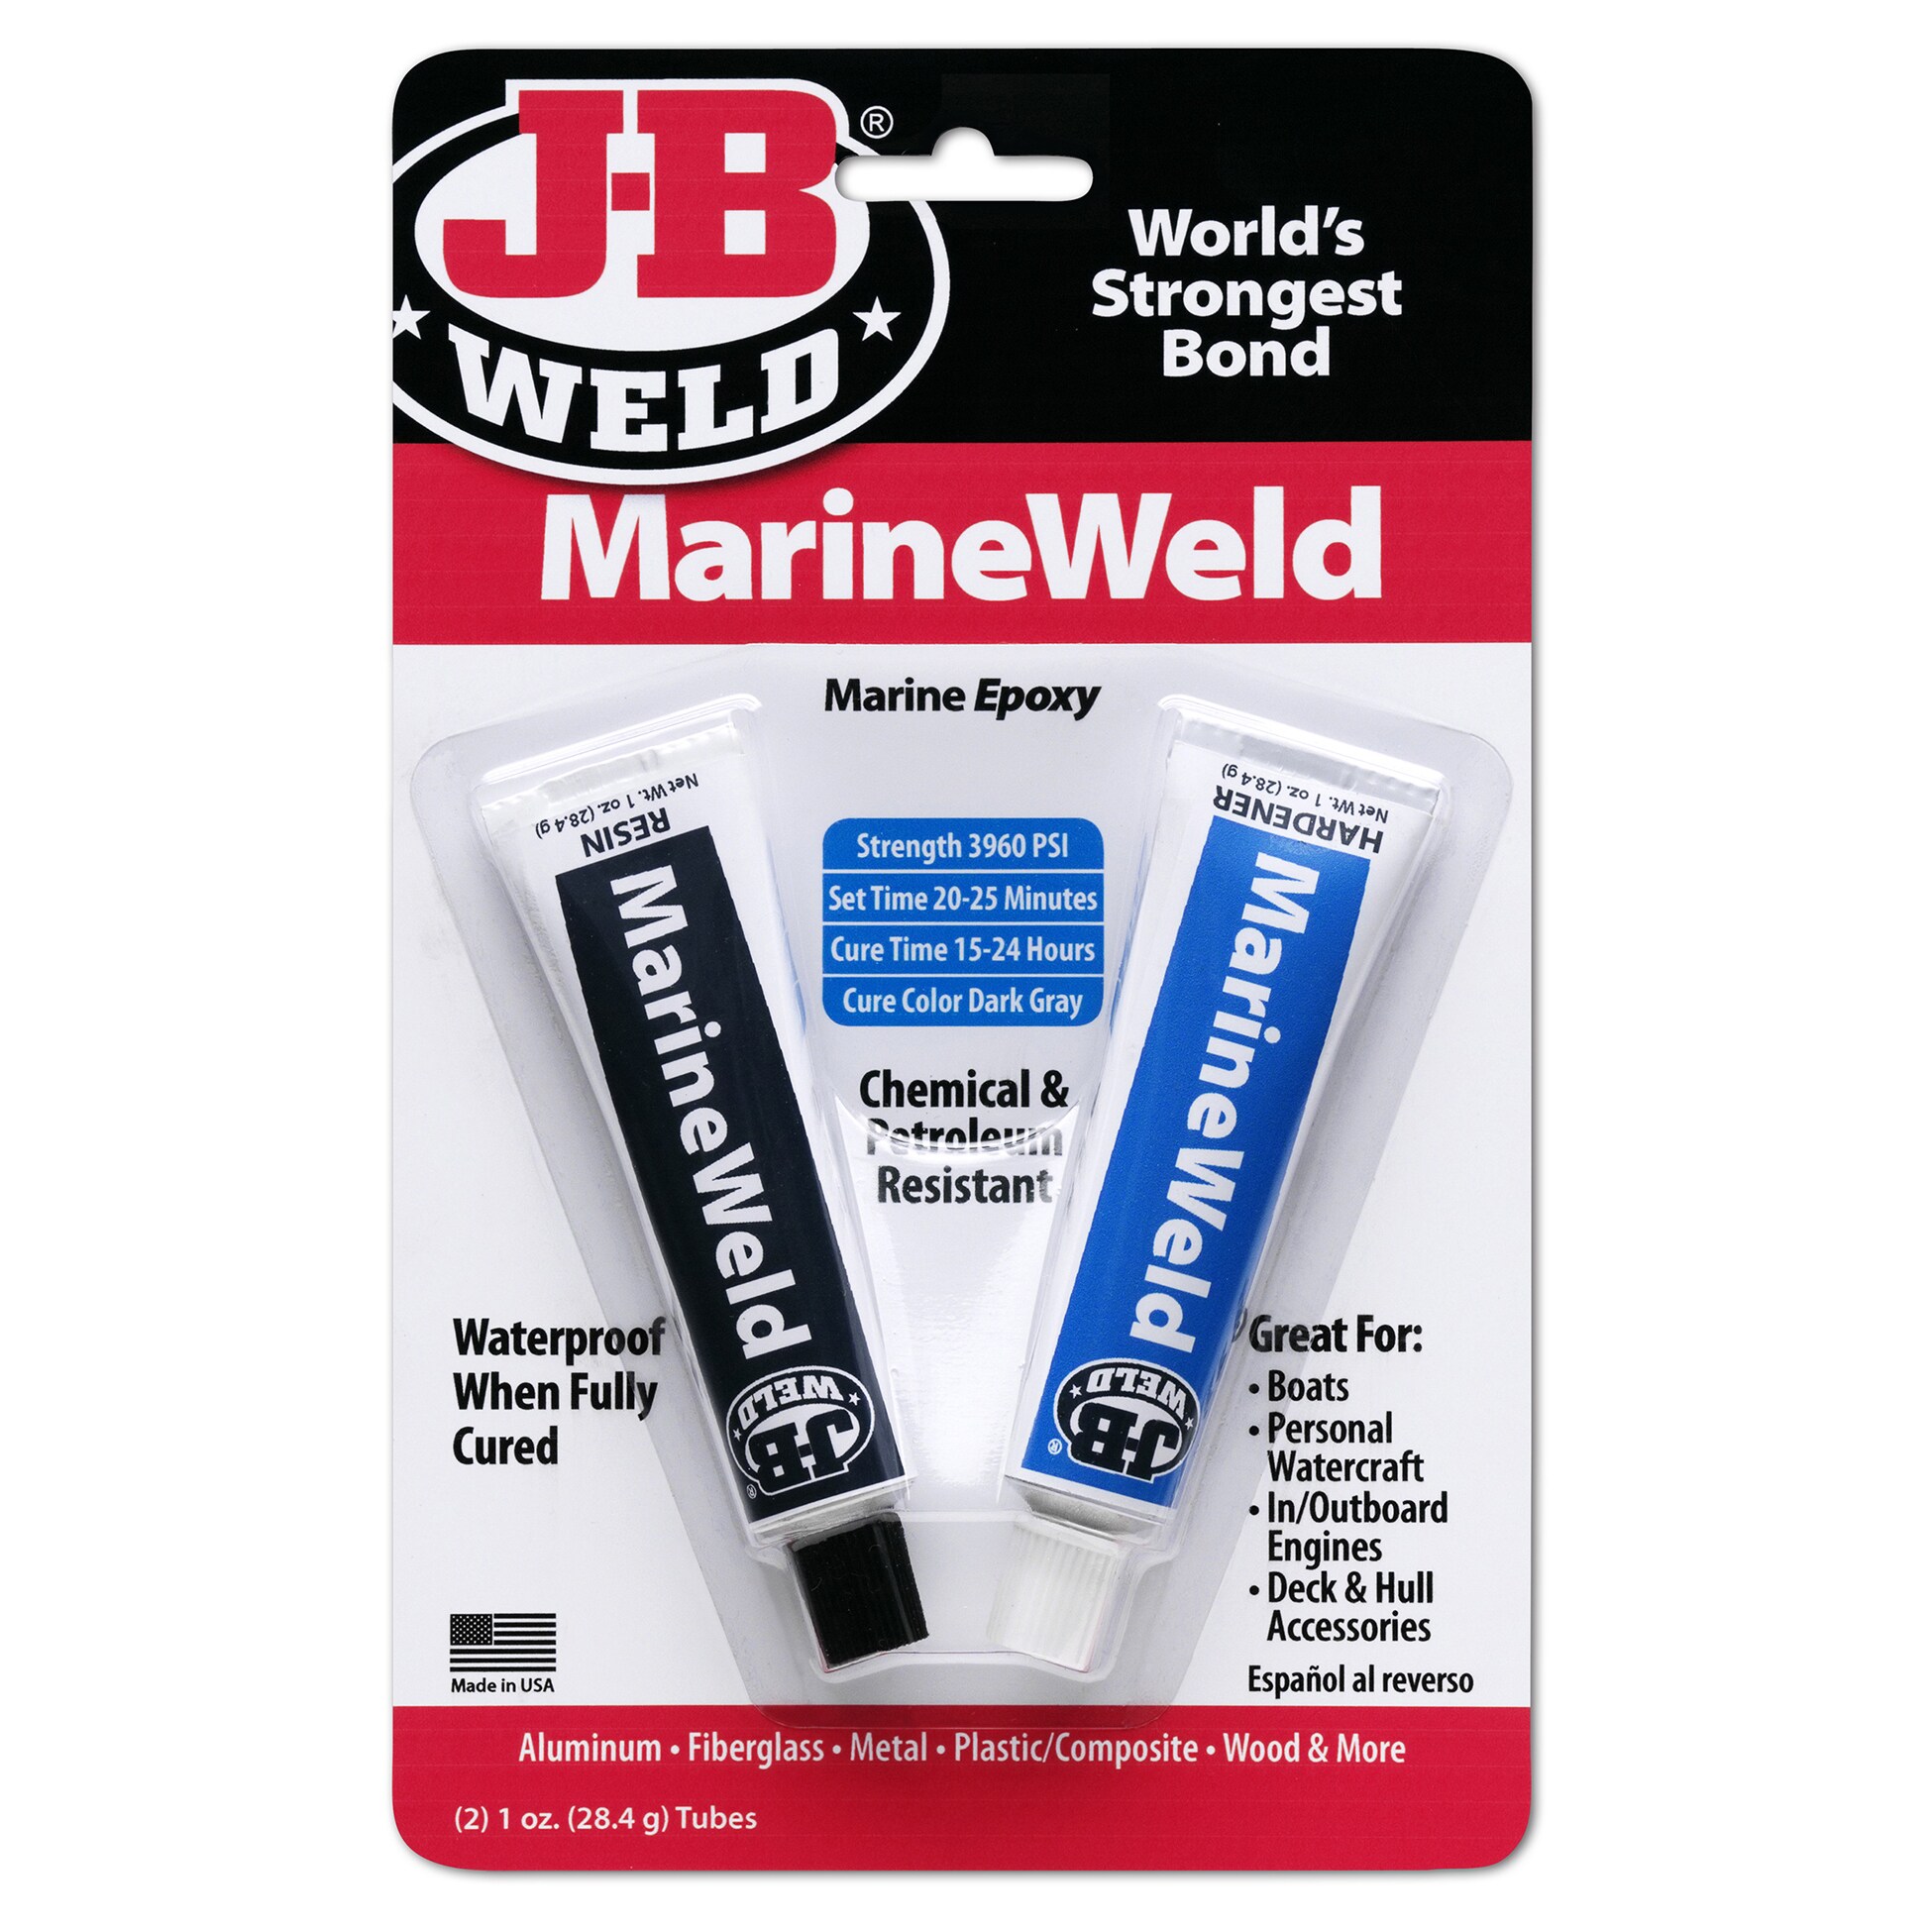 J-B Weld 1oz Gray Marine Weld Epoxy Adhesive Kit is a specially formulated two-part epoxy cold weld system that provides for strong, lasting repairs for bonding different or similar surfaces - image 3 of 7